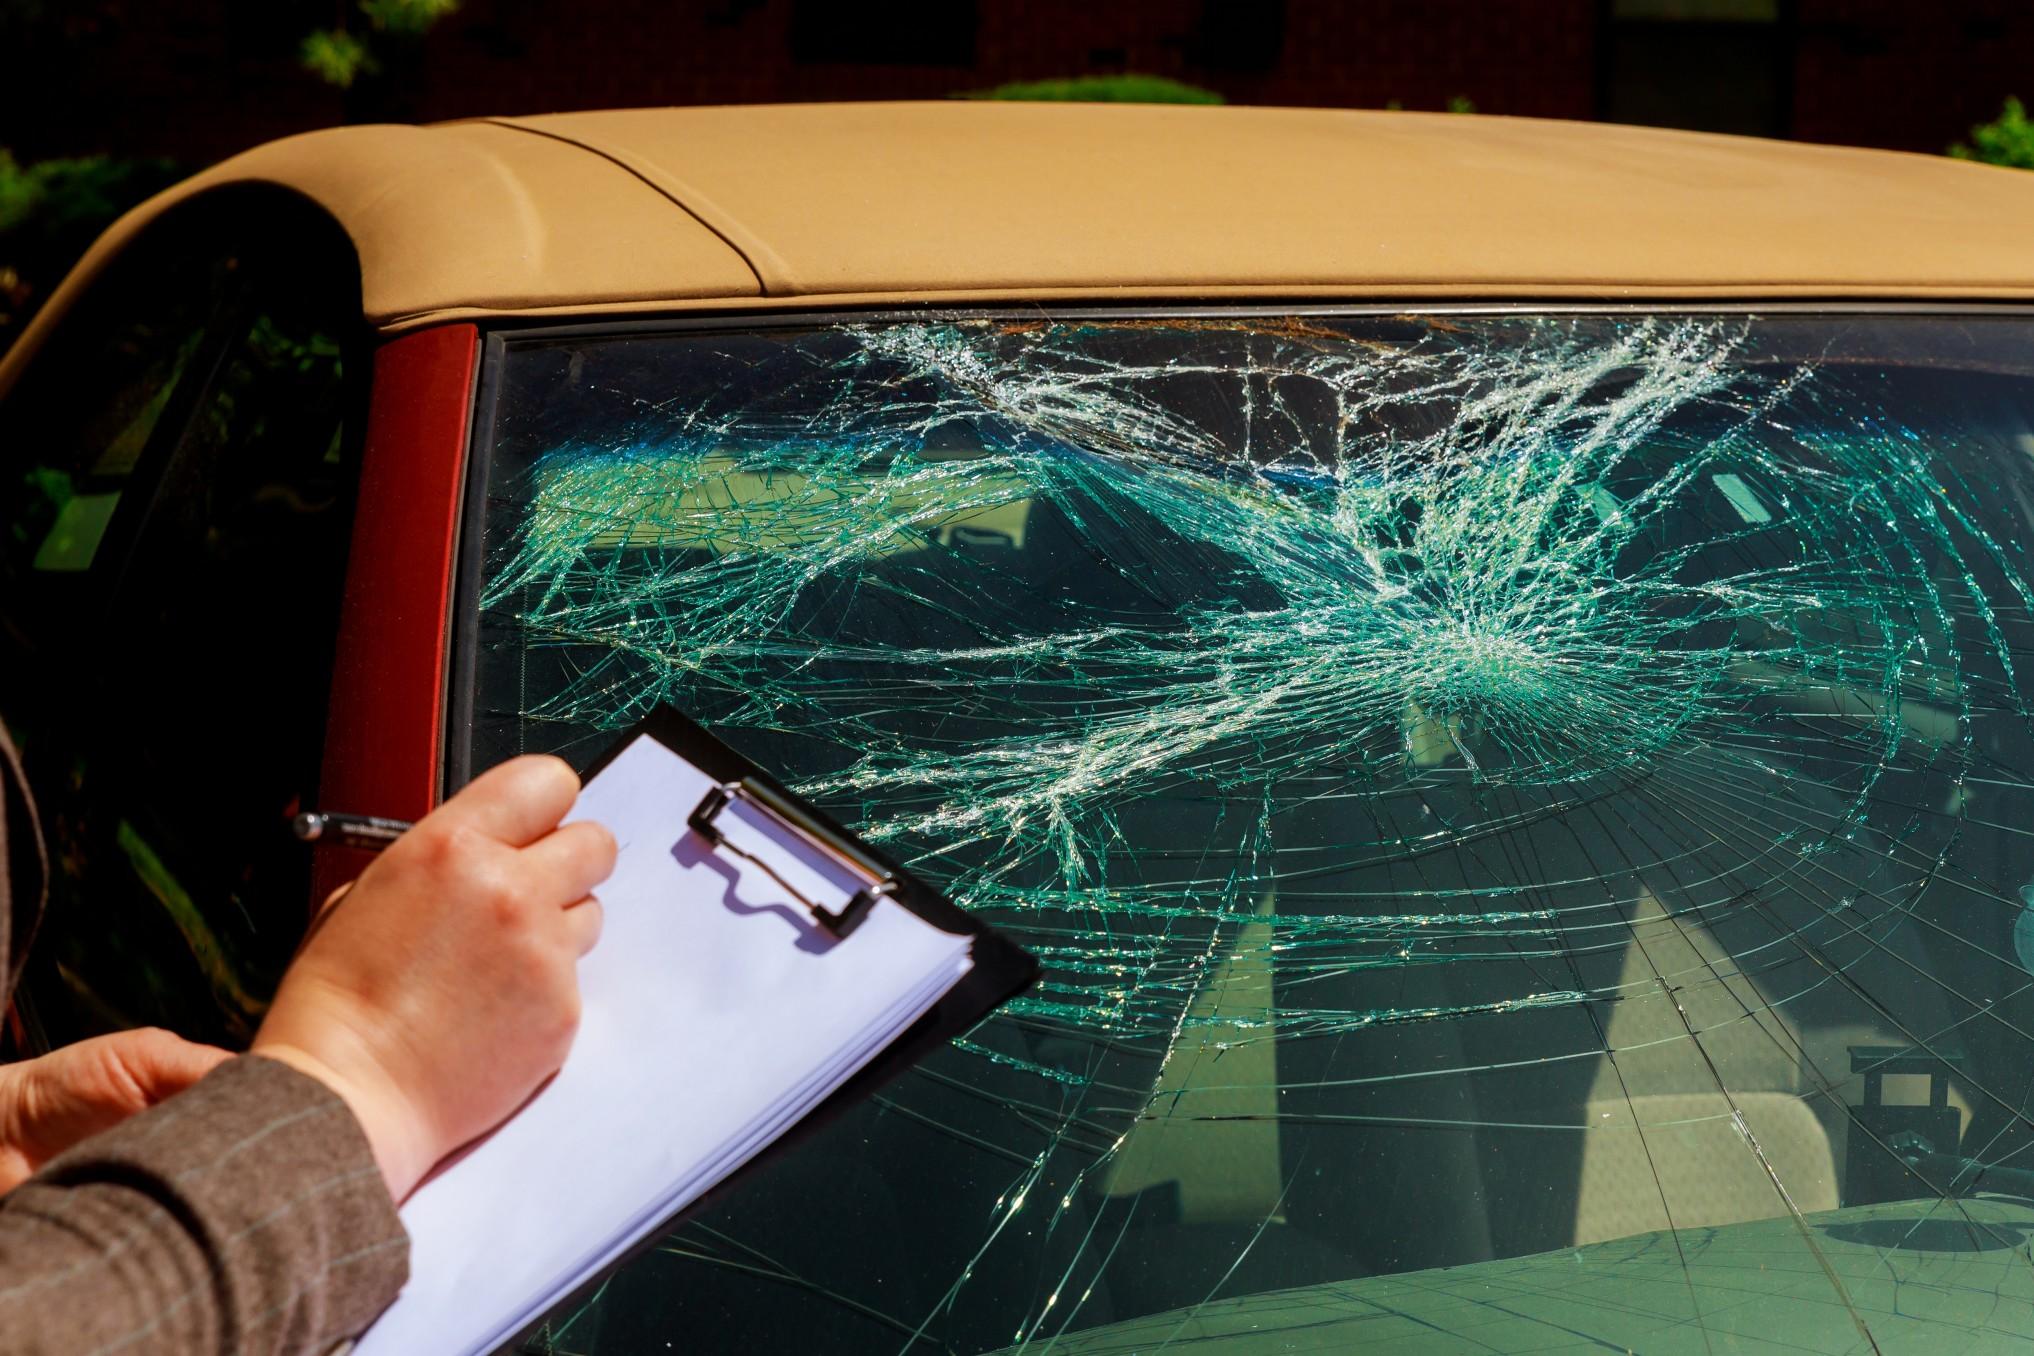 Filing a claim after an accident can be frustrating | Twenty20